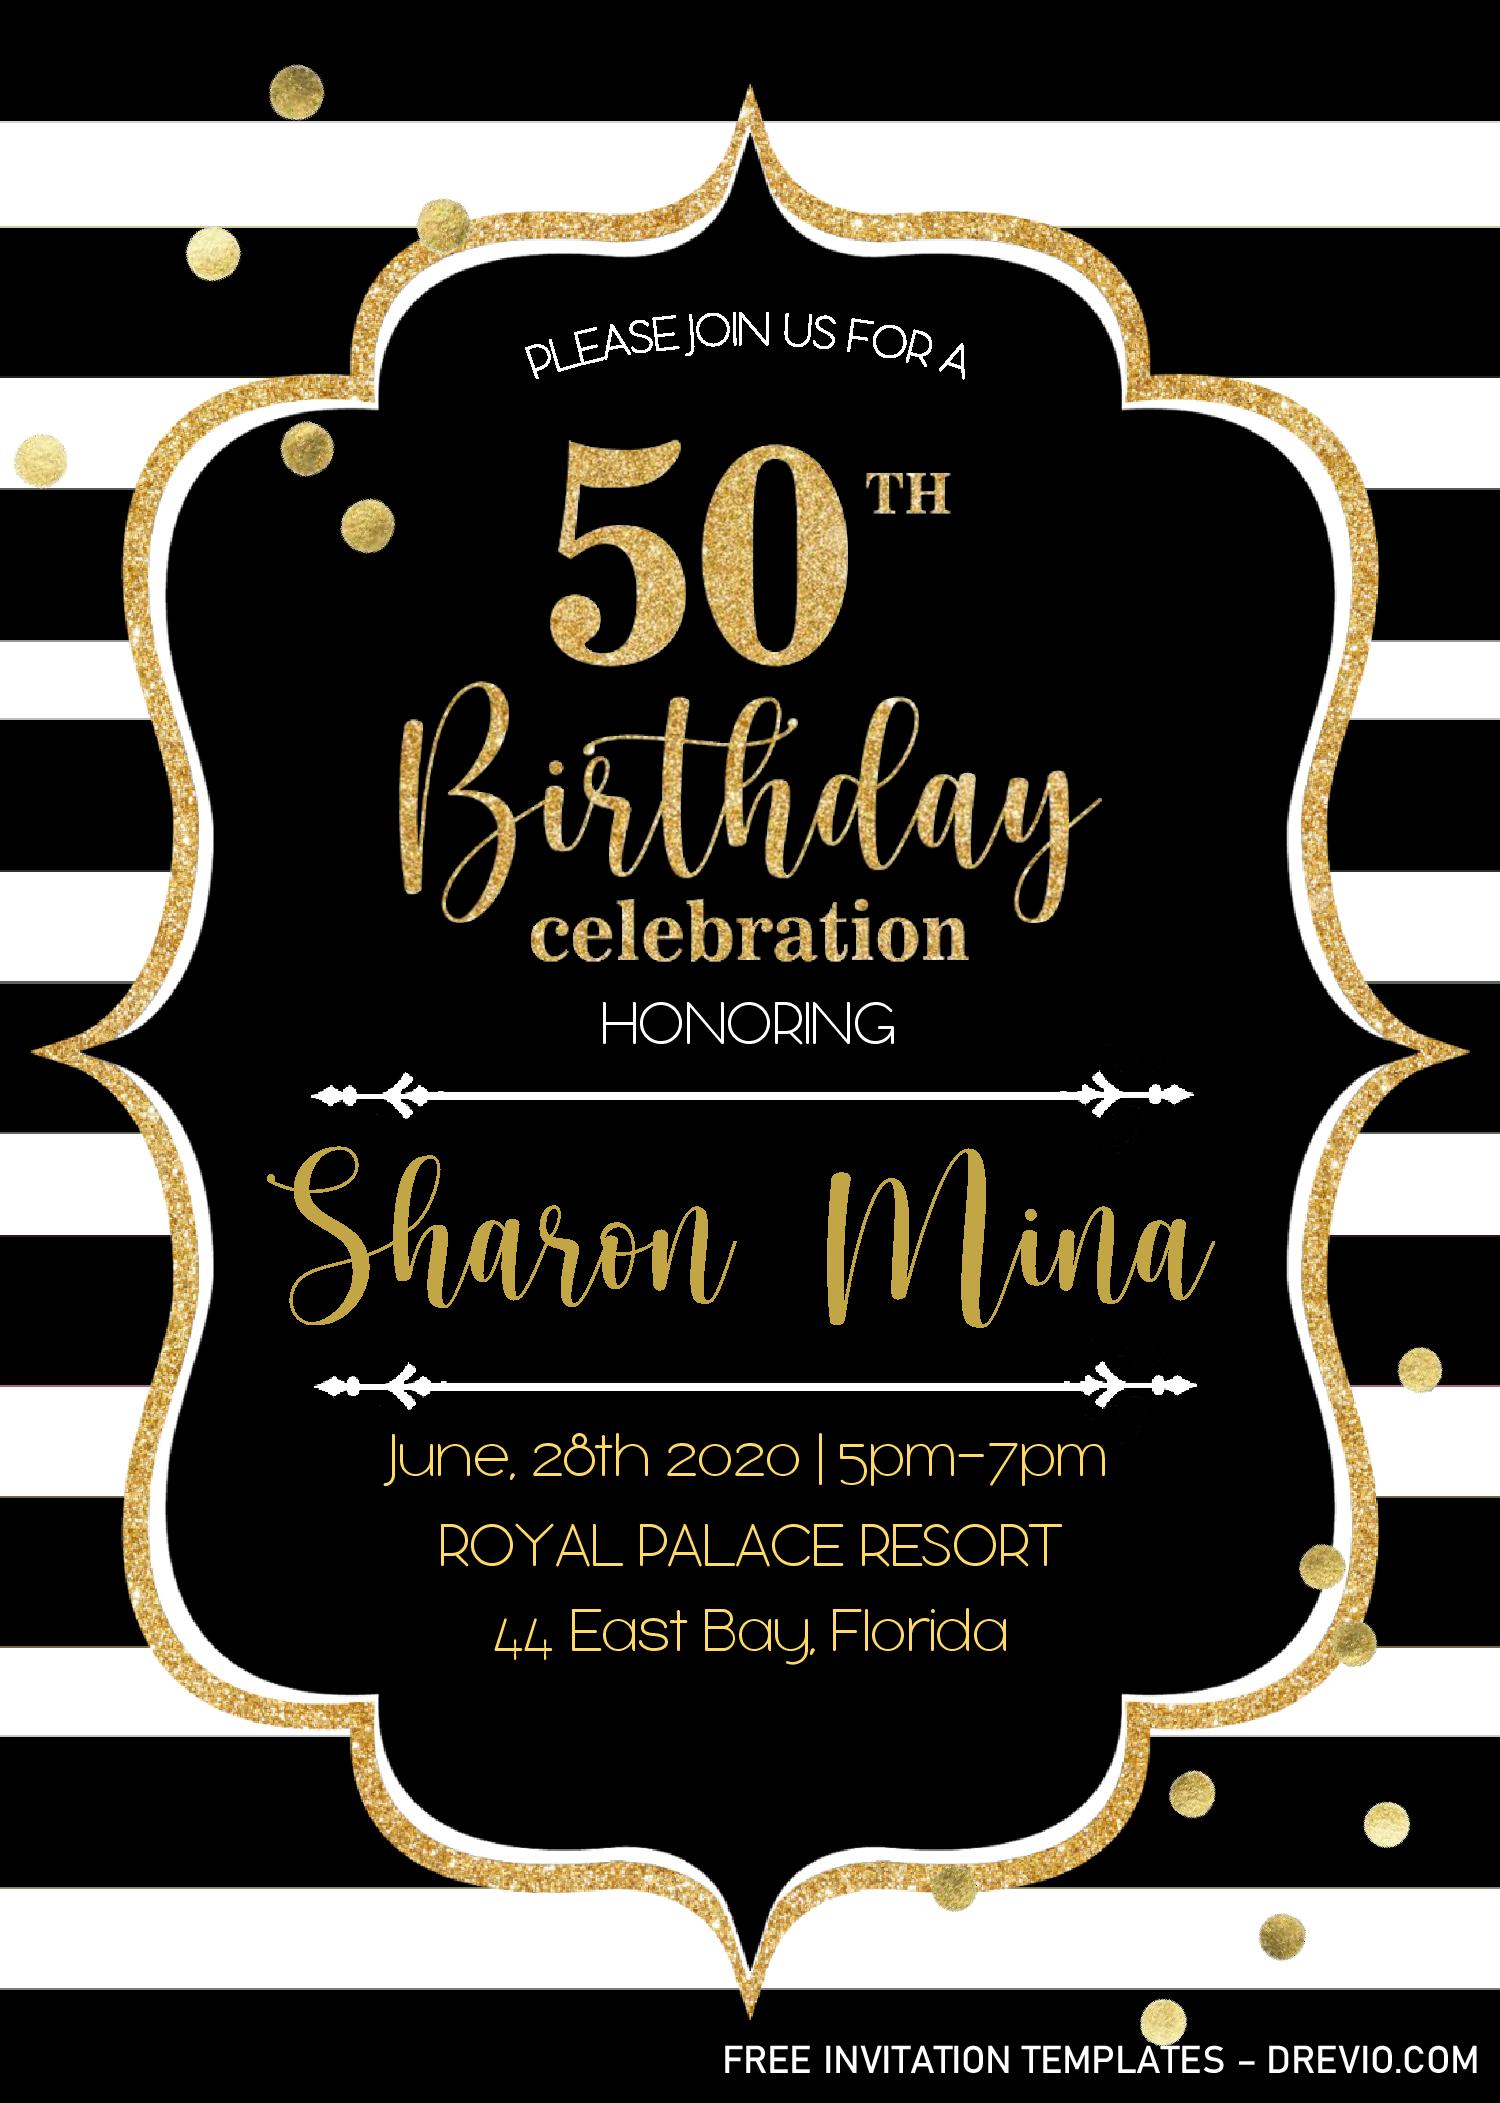 50th Birthday Card Templates Free Download - Get What You Need For Free